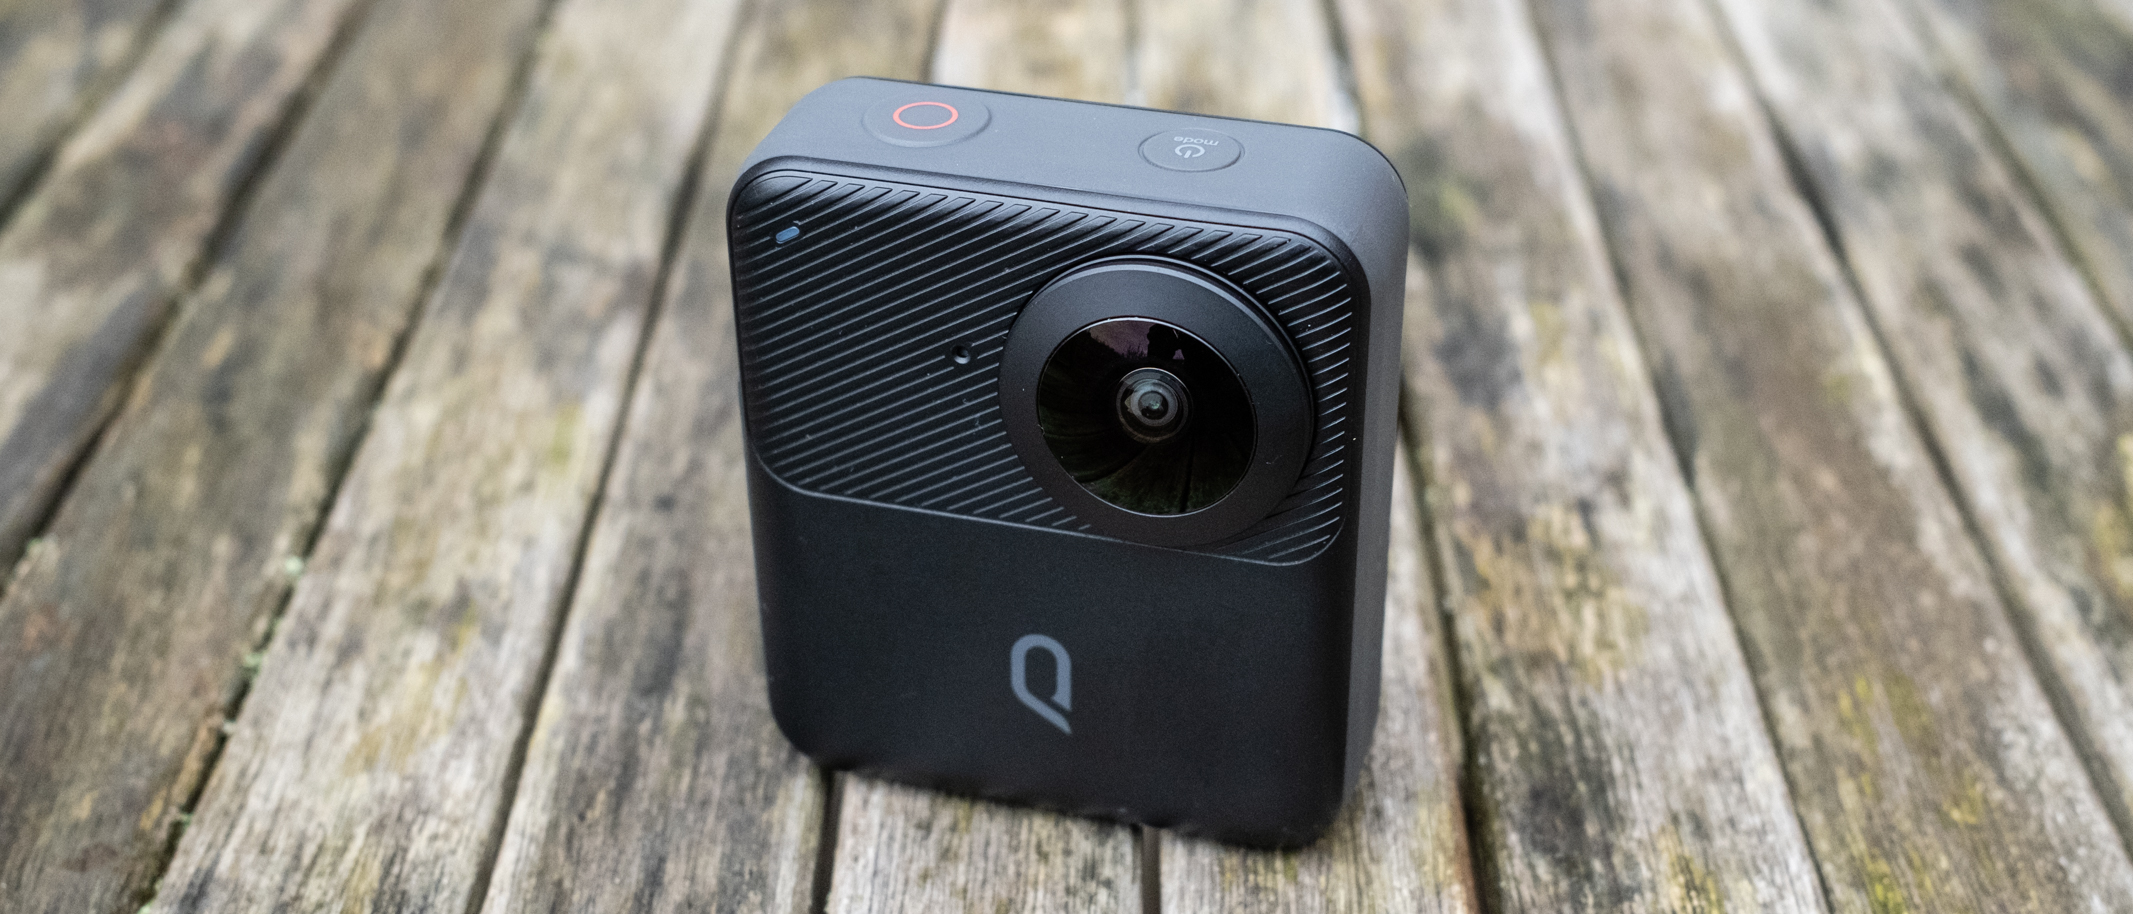 Insta360 X3 action camera review: Better than a GoPro for general